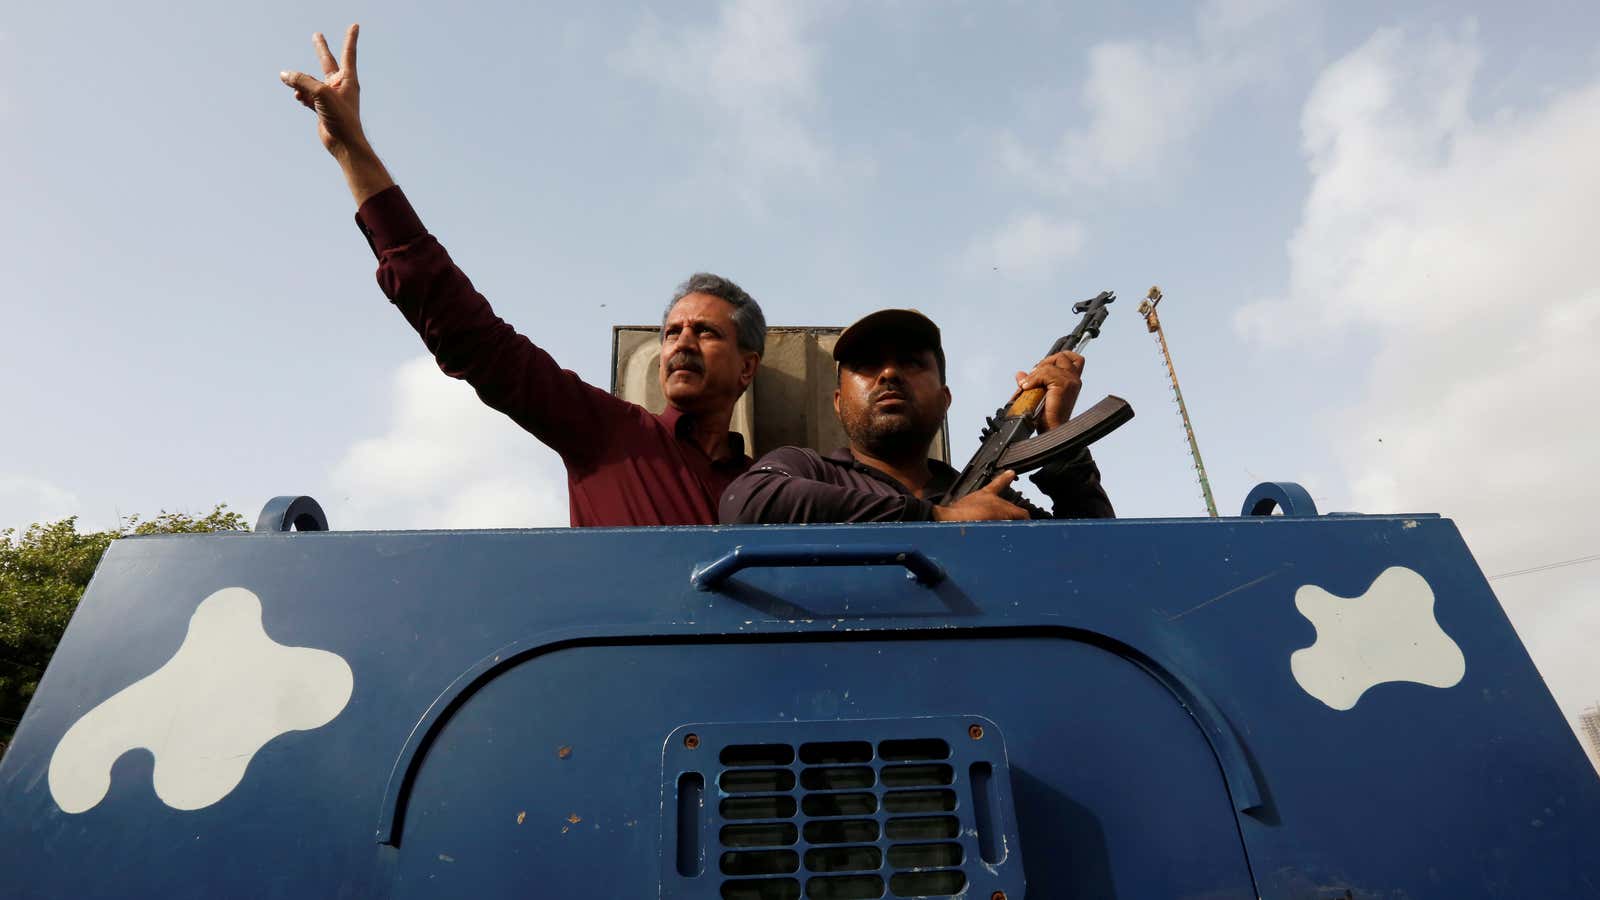 For Waseem Akhtar, Karachi’s new mayor, prison is an extension of the office (Reuters/Akhtar Soomro)